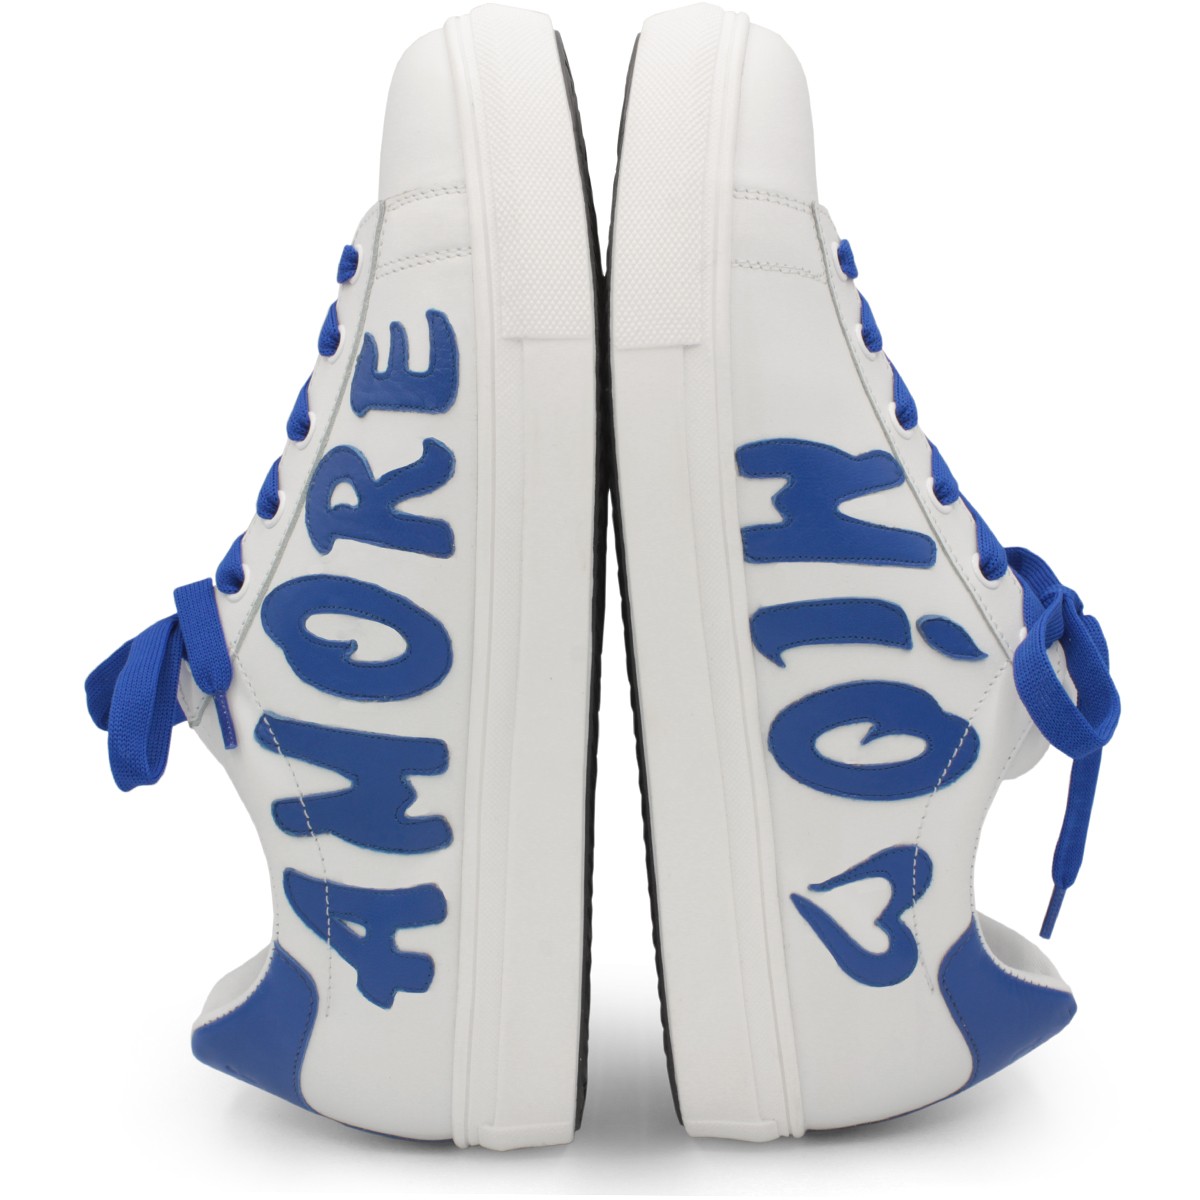 SNEAKERS "AMORE MIO" BIANCO-BLUE